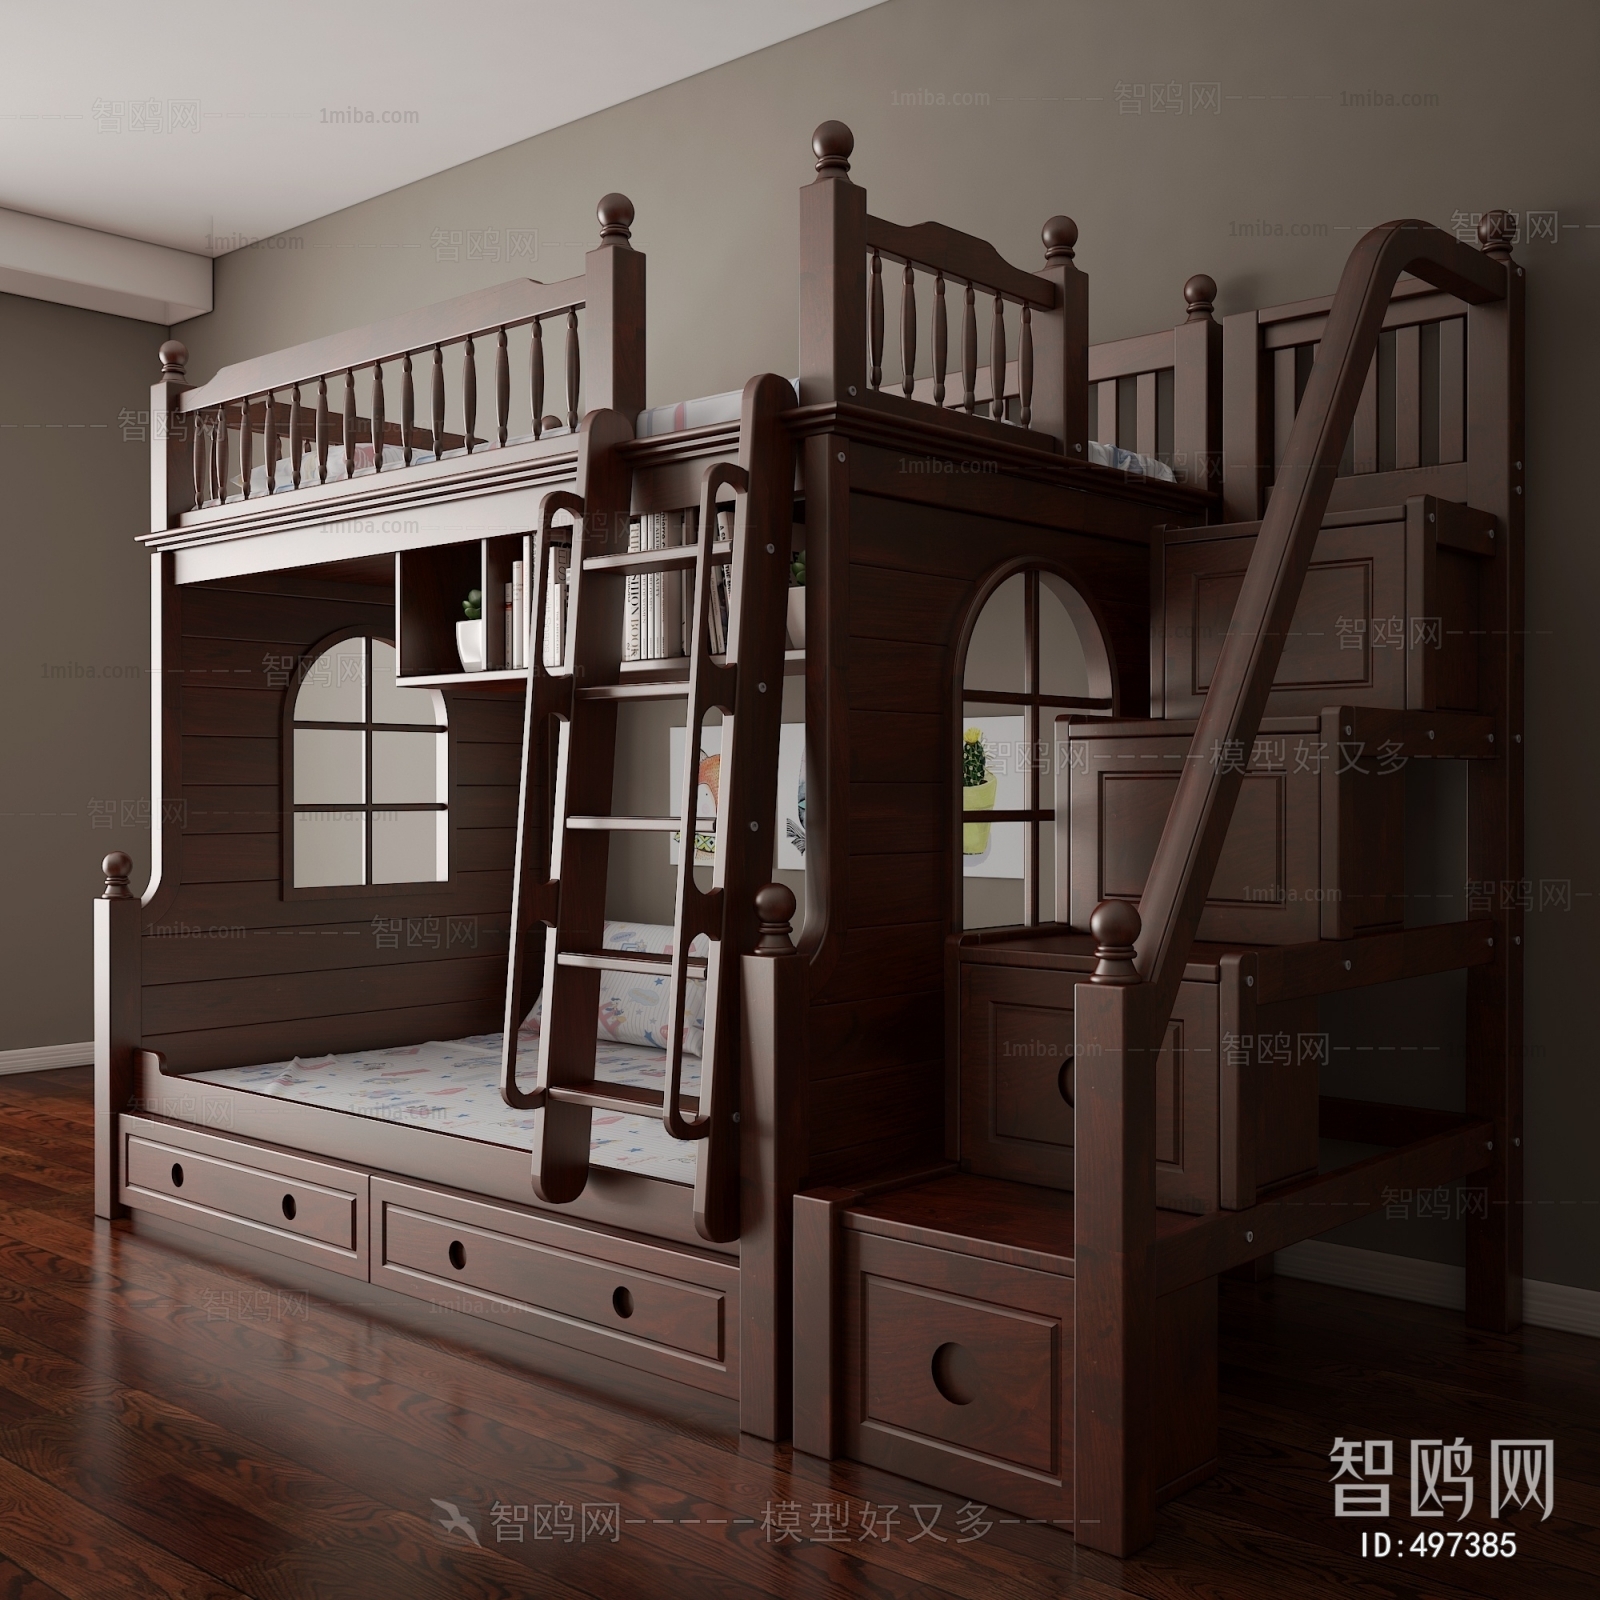 European Style Bunk Bed